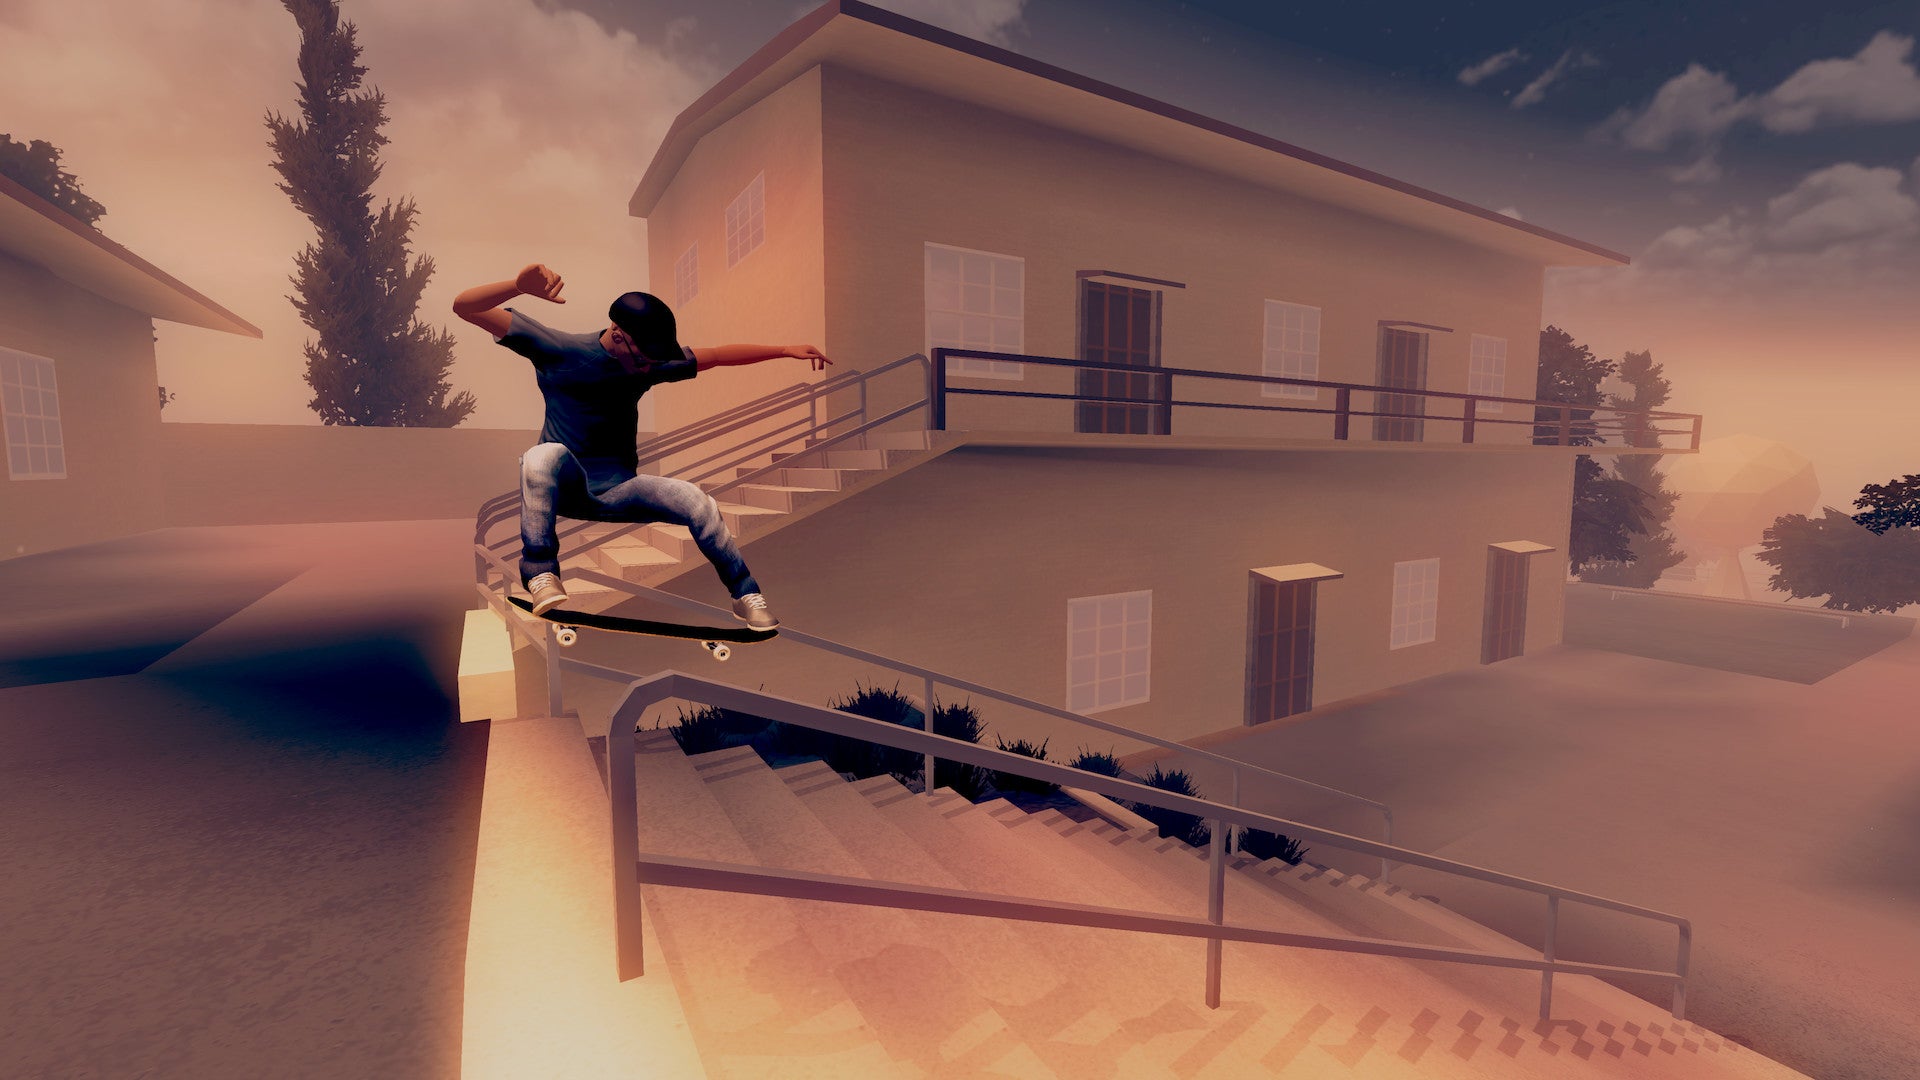 The player character skates along a stair railing in Skate City